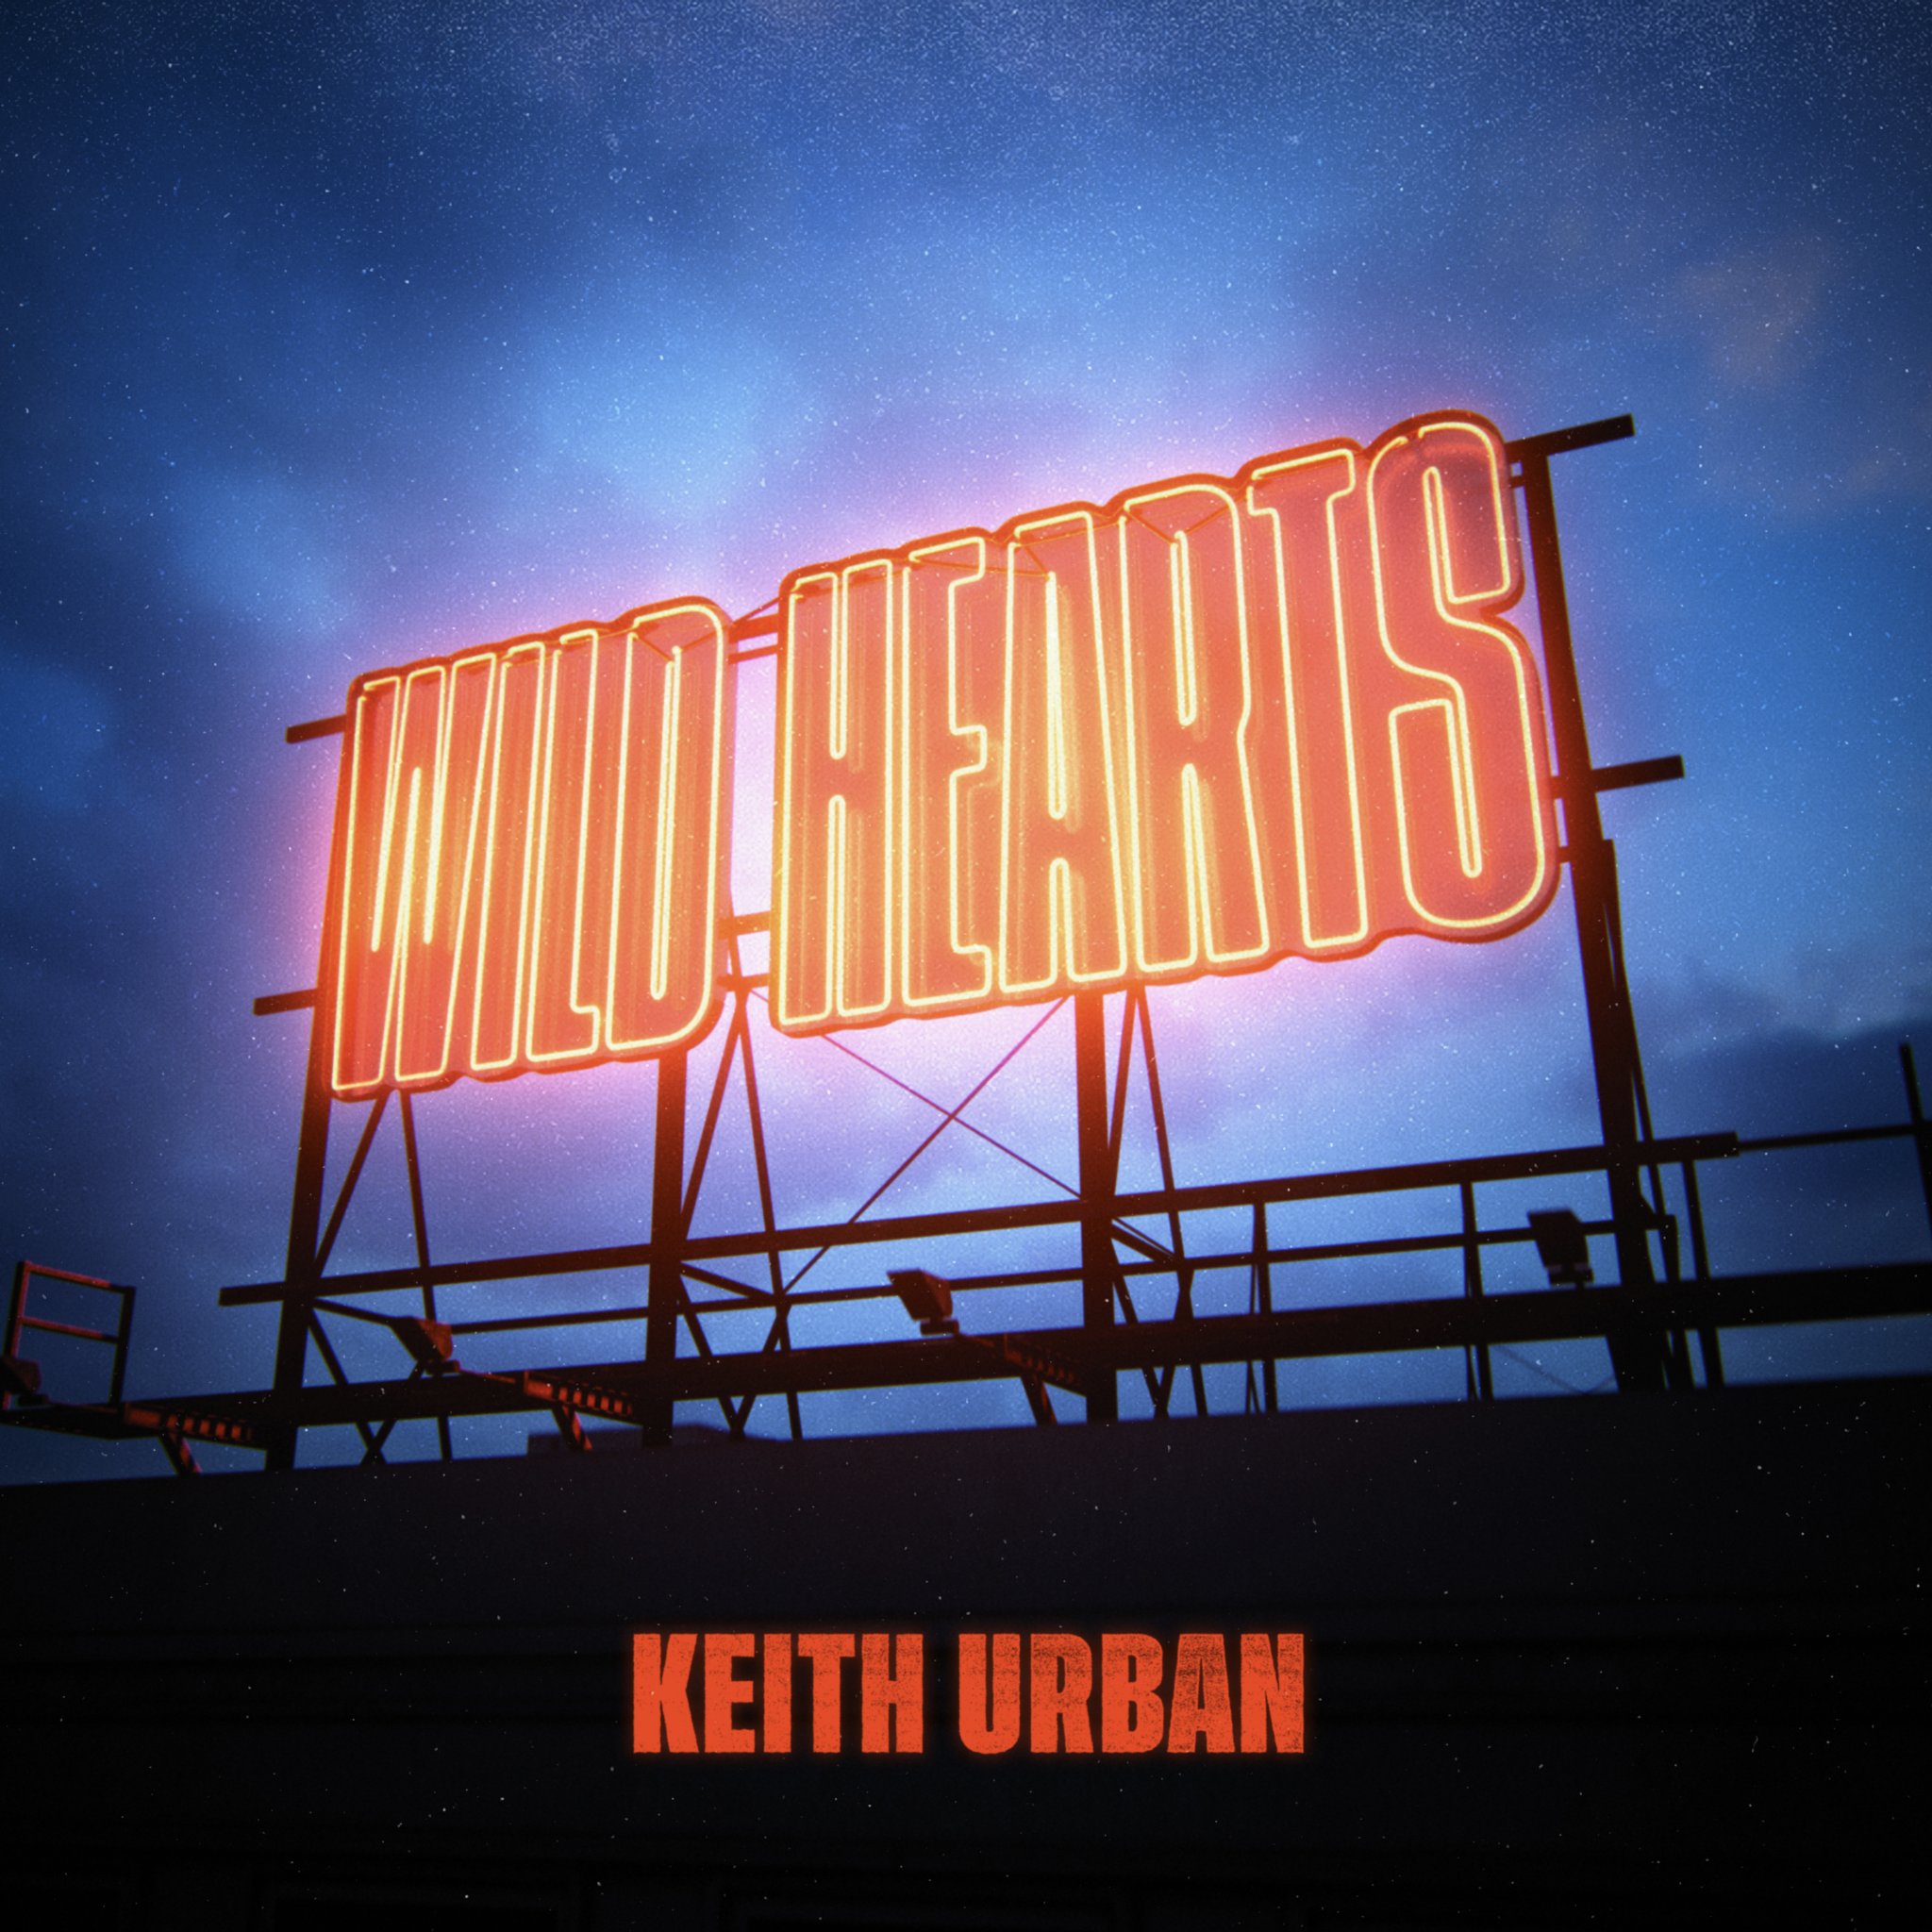 Keith Urban's new song "Wild Hearts" is out now, August 19th, on all streaming platforms